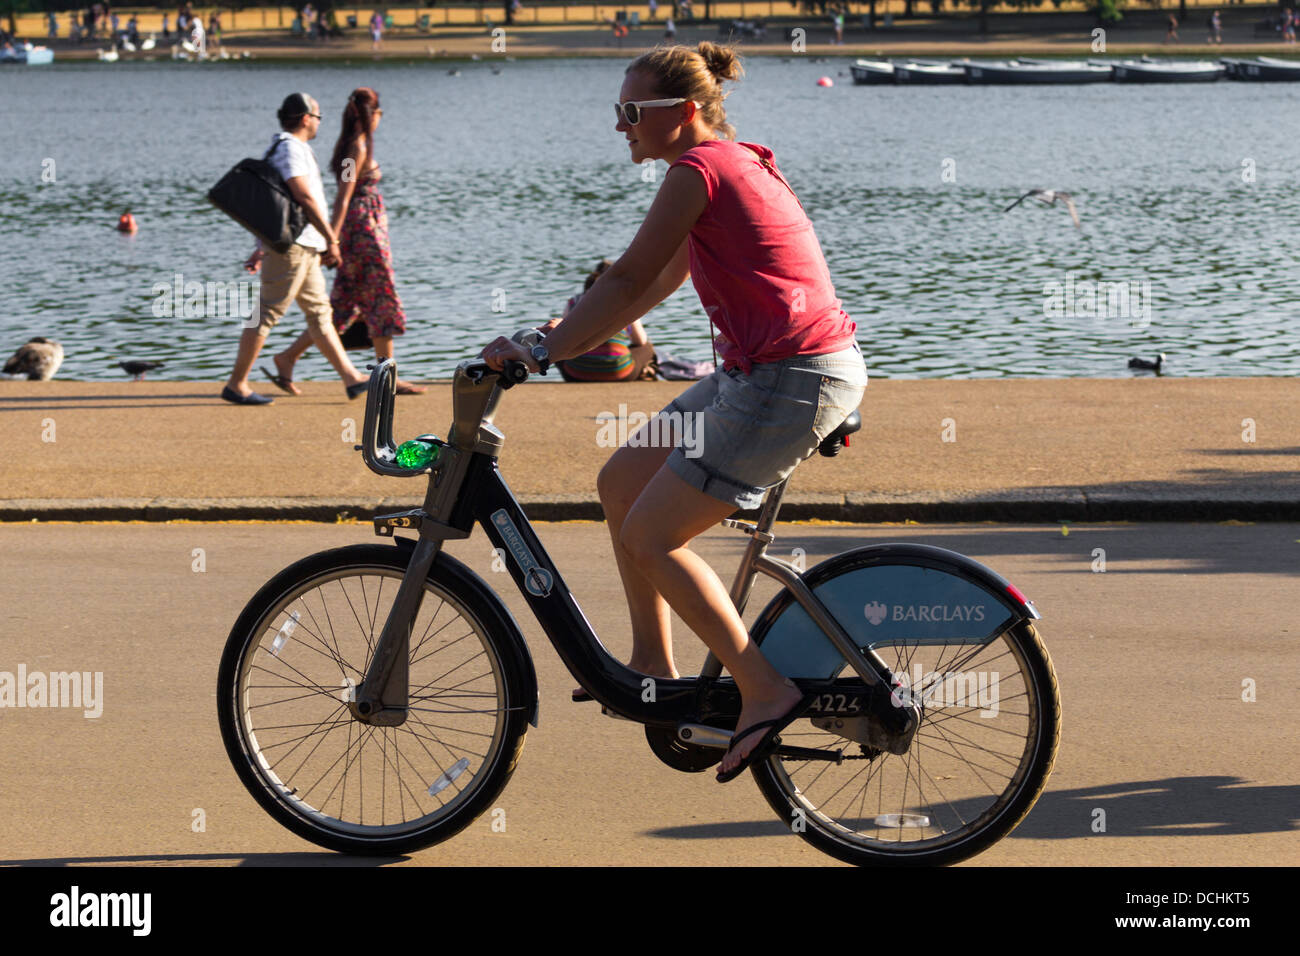 Women riding hired Cycle - Hyde Park - London [Barclays bike hire scheme] Stock Photo